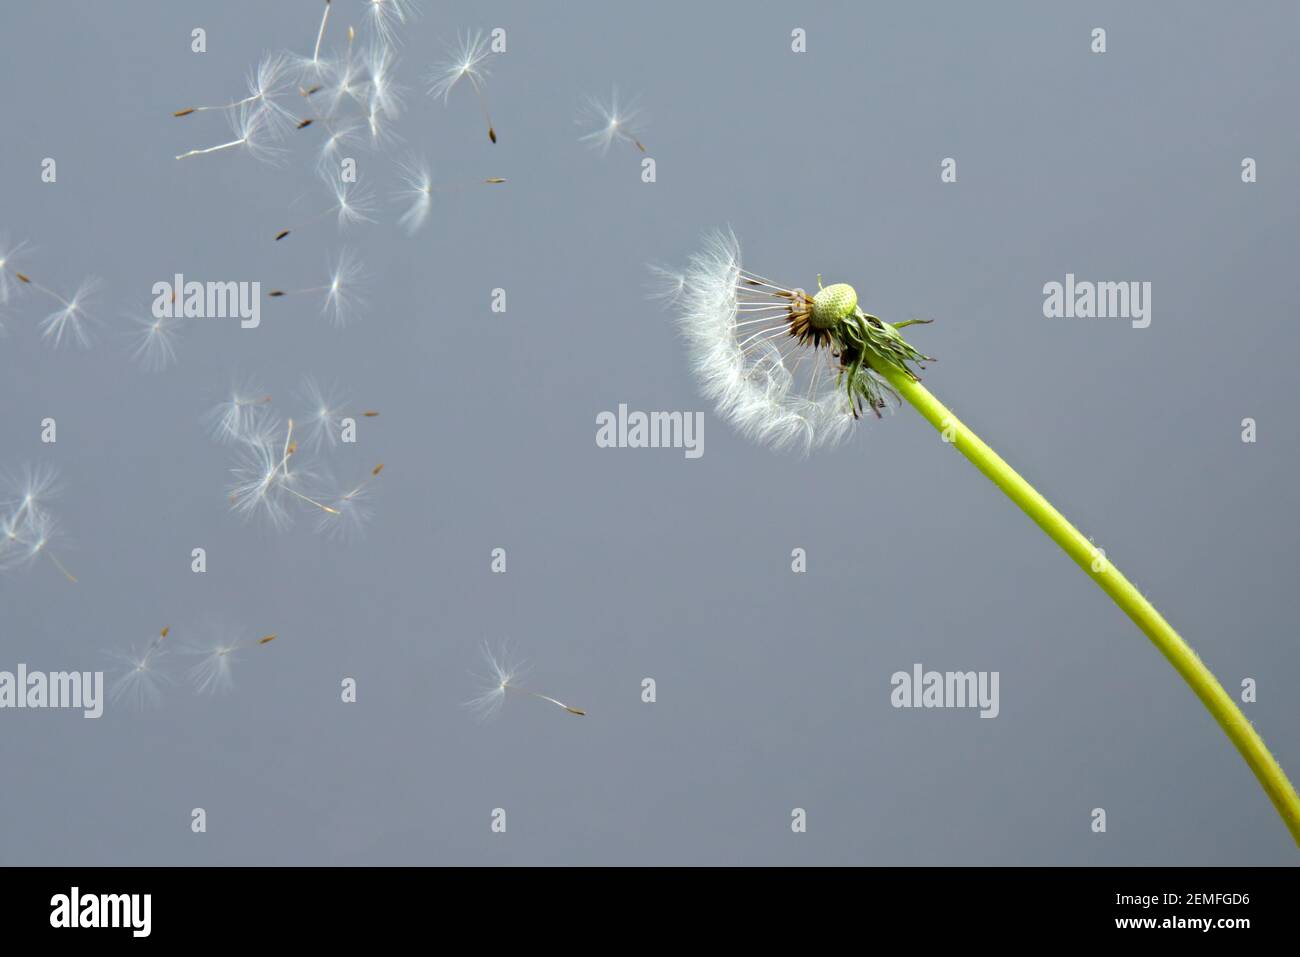 Dandelion (Taraxacum officinale) with flying seeds on grey background; isolated color studio photo. Stock Photo